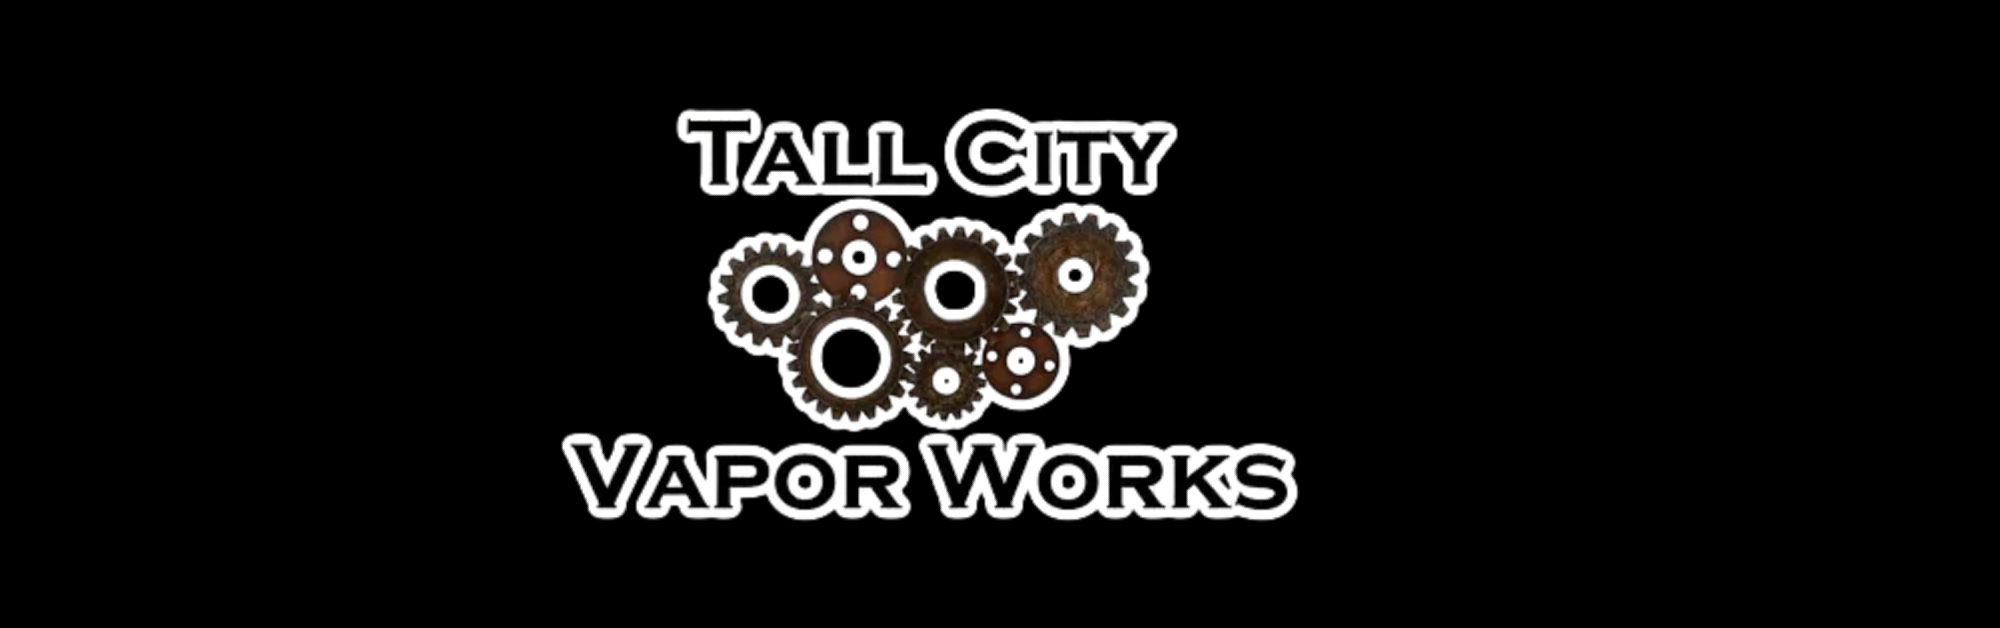 image of tall city vapor works in odessa tx